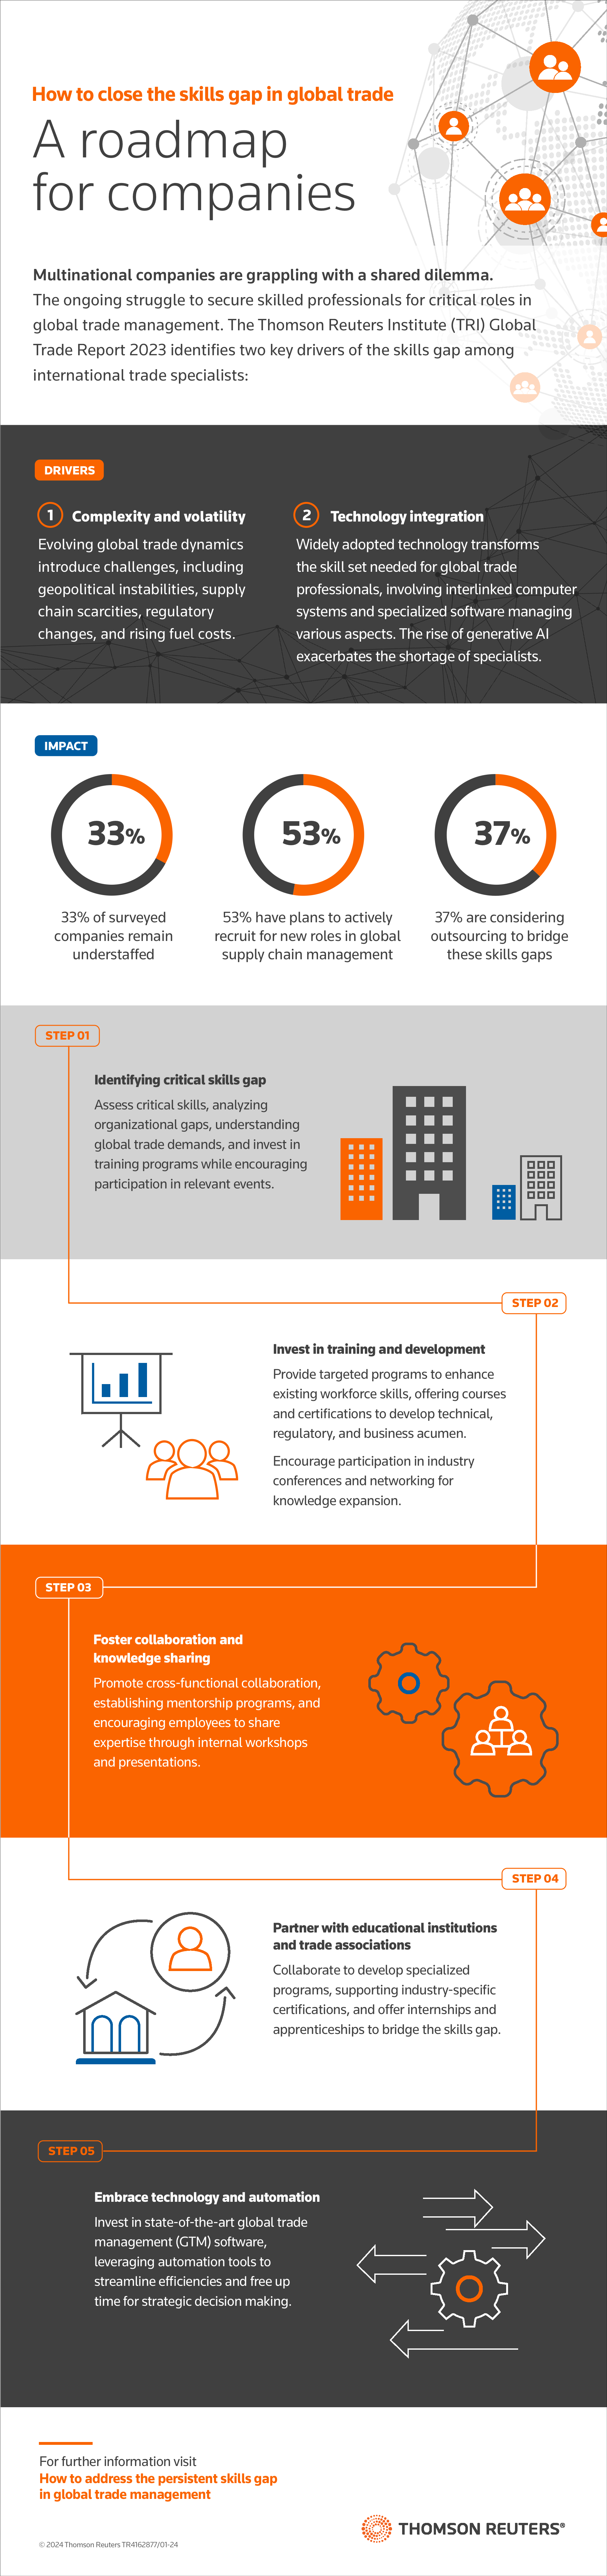 How to close the skills gap - Infographic - web graphic